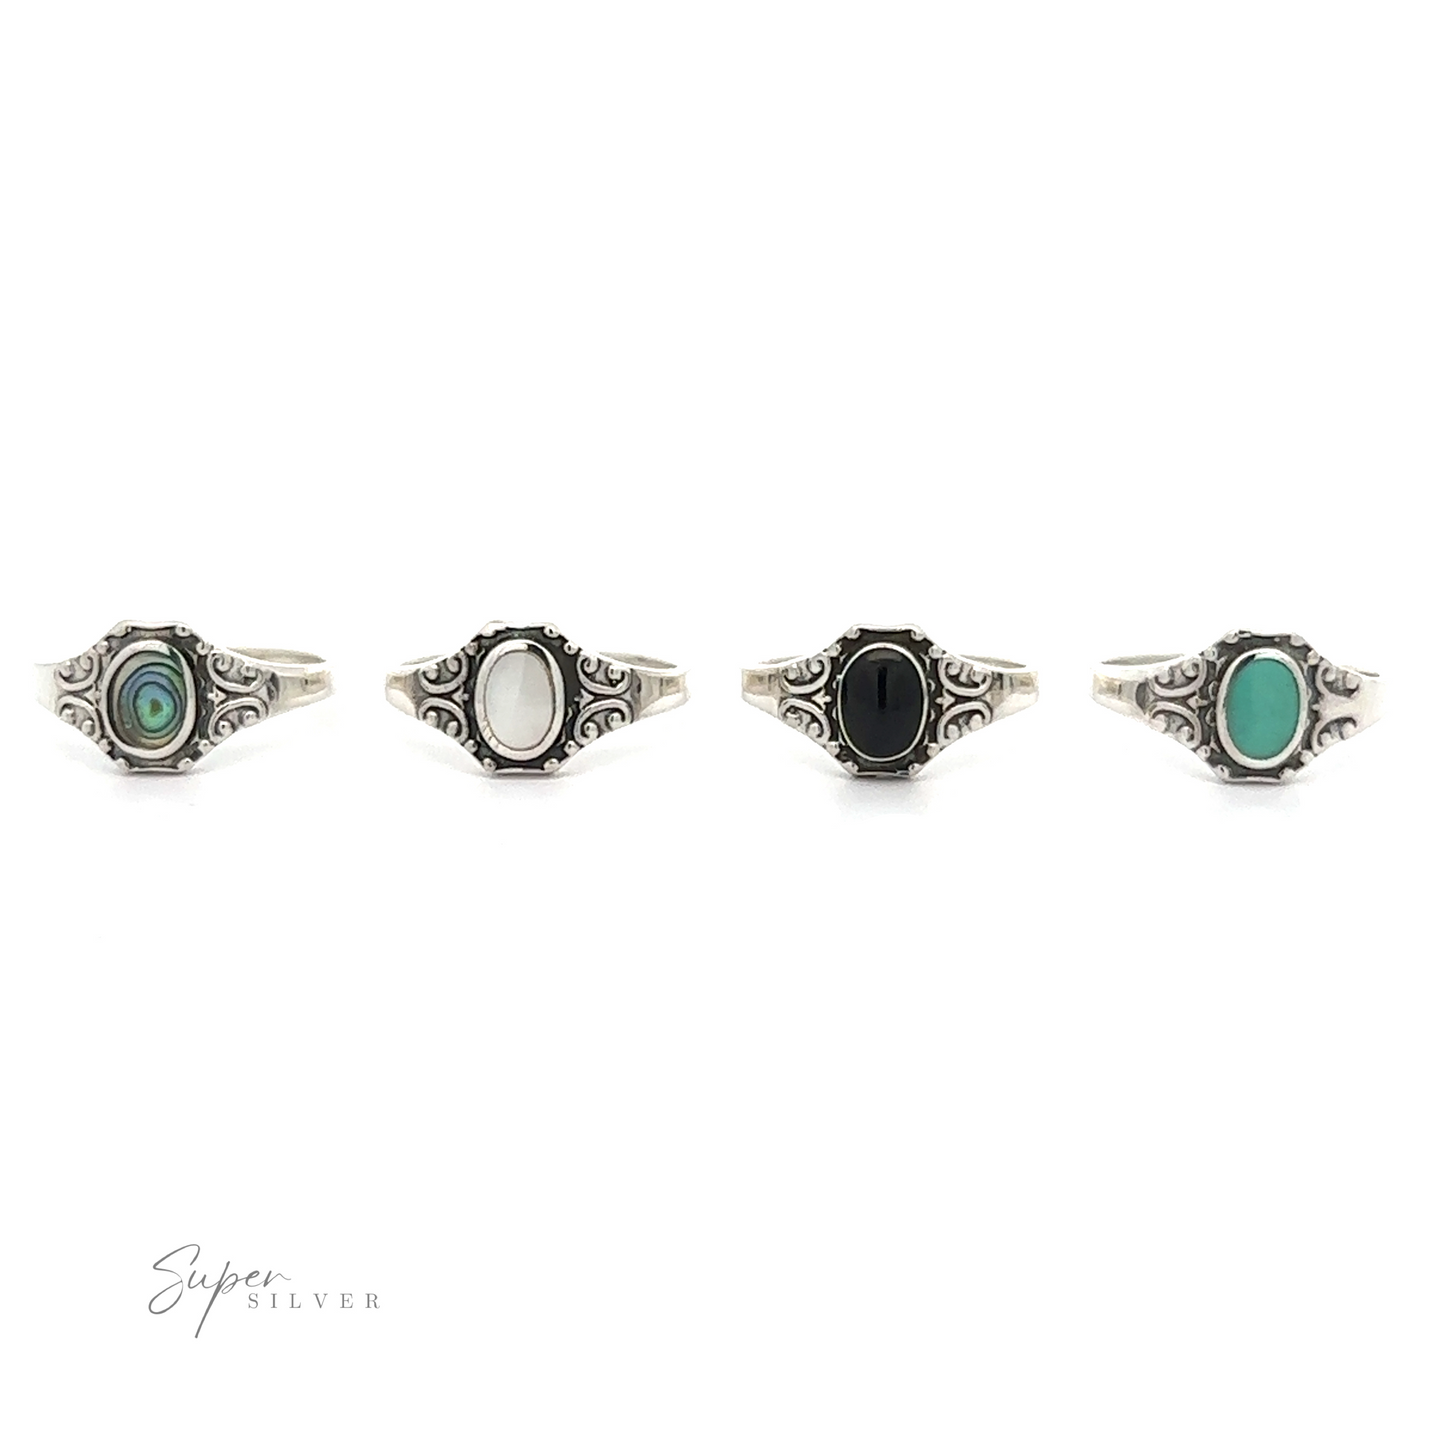 
                  
                    Four Oval Inlay Stone Rings with Antiqued Filigree Design in black, green, and white.
                  
                